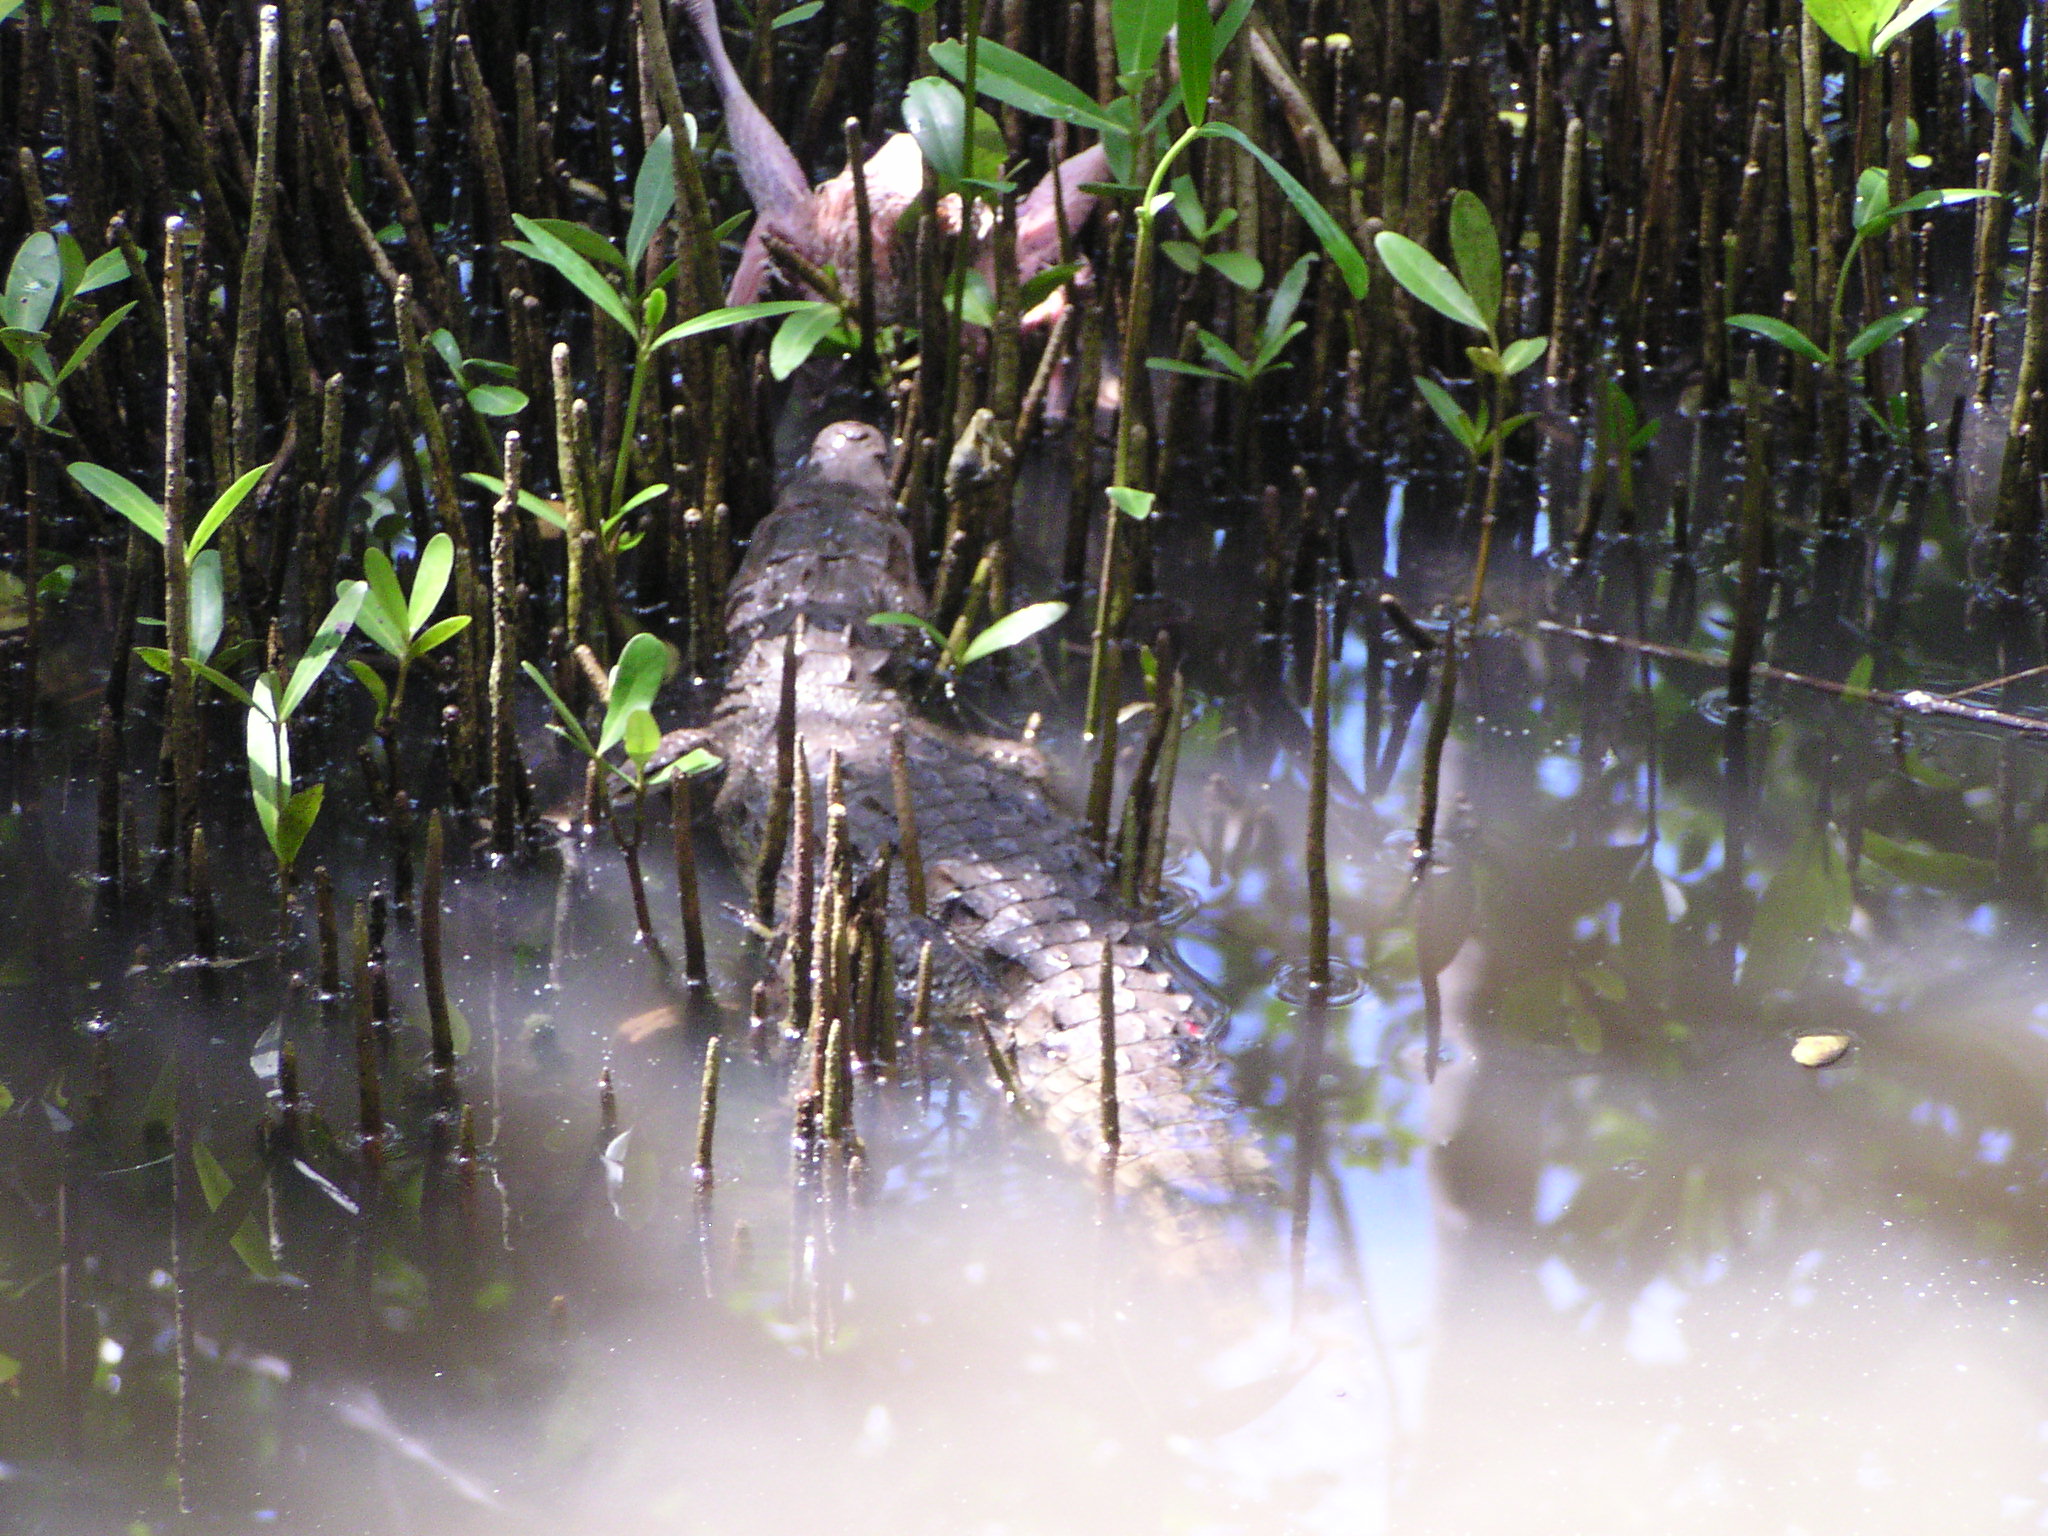 The American crocodile is "the king" in this area